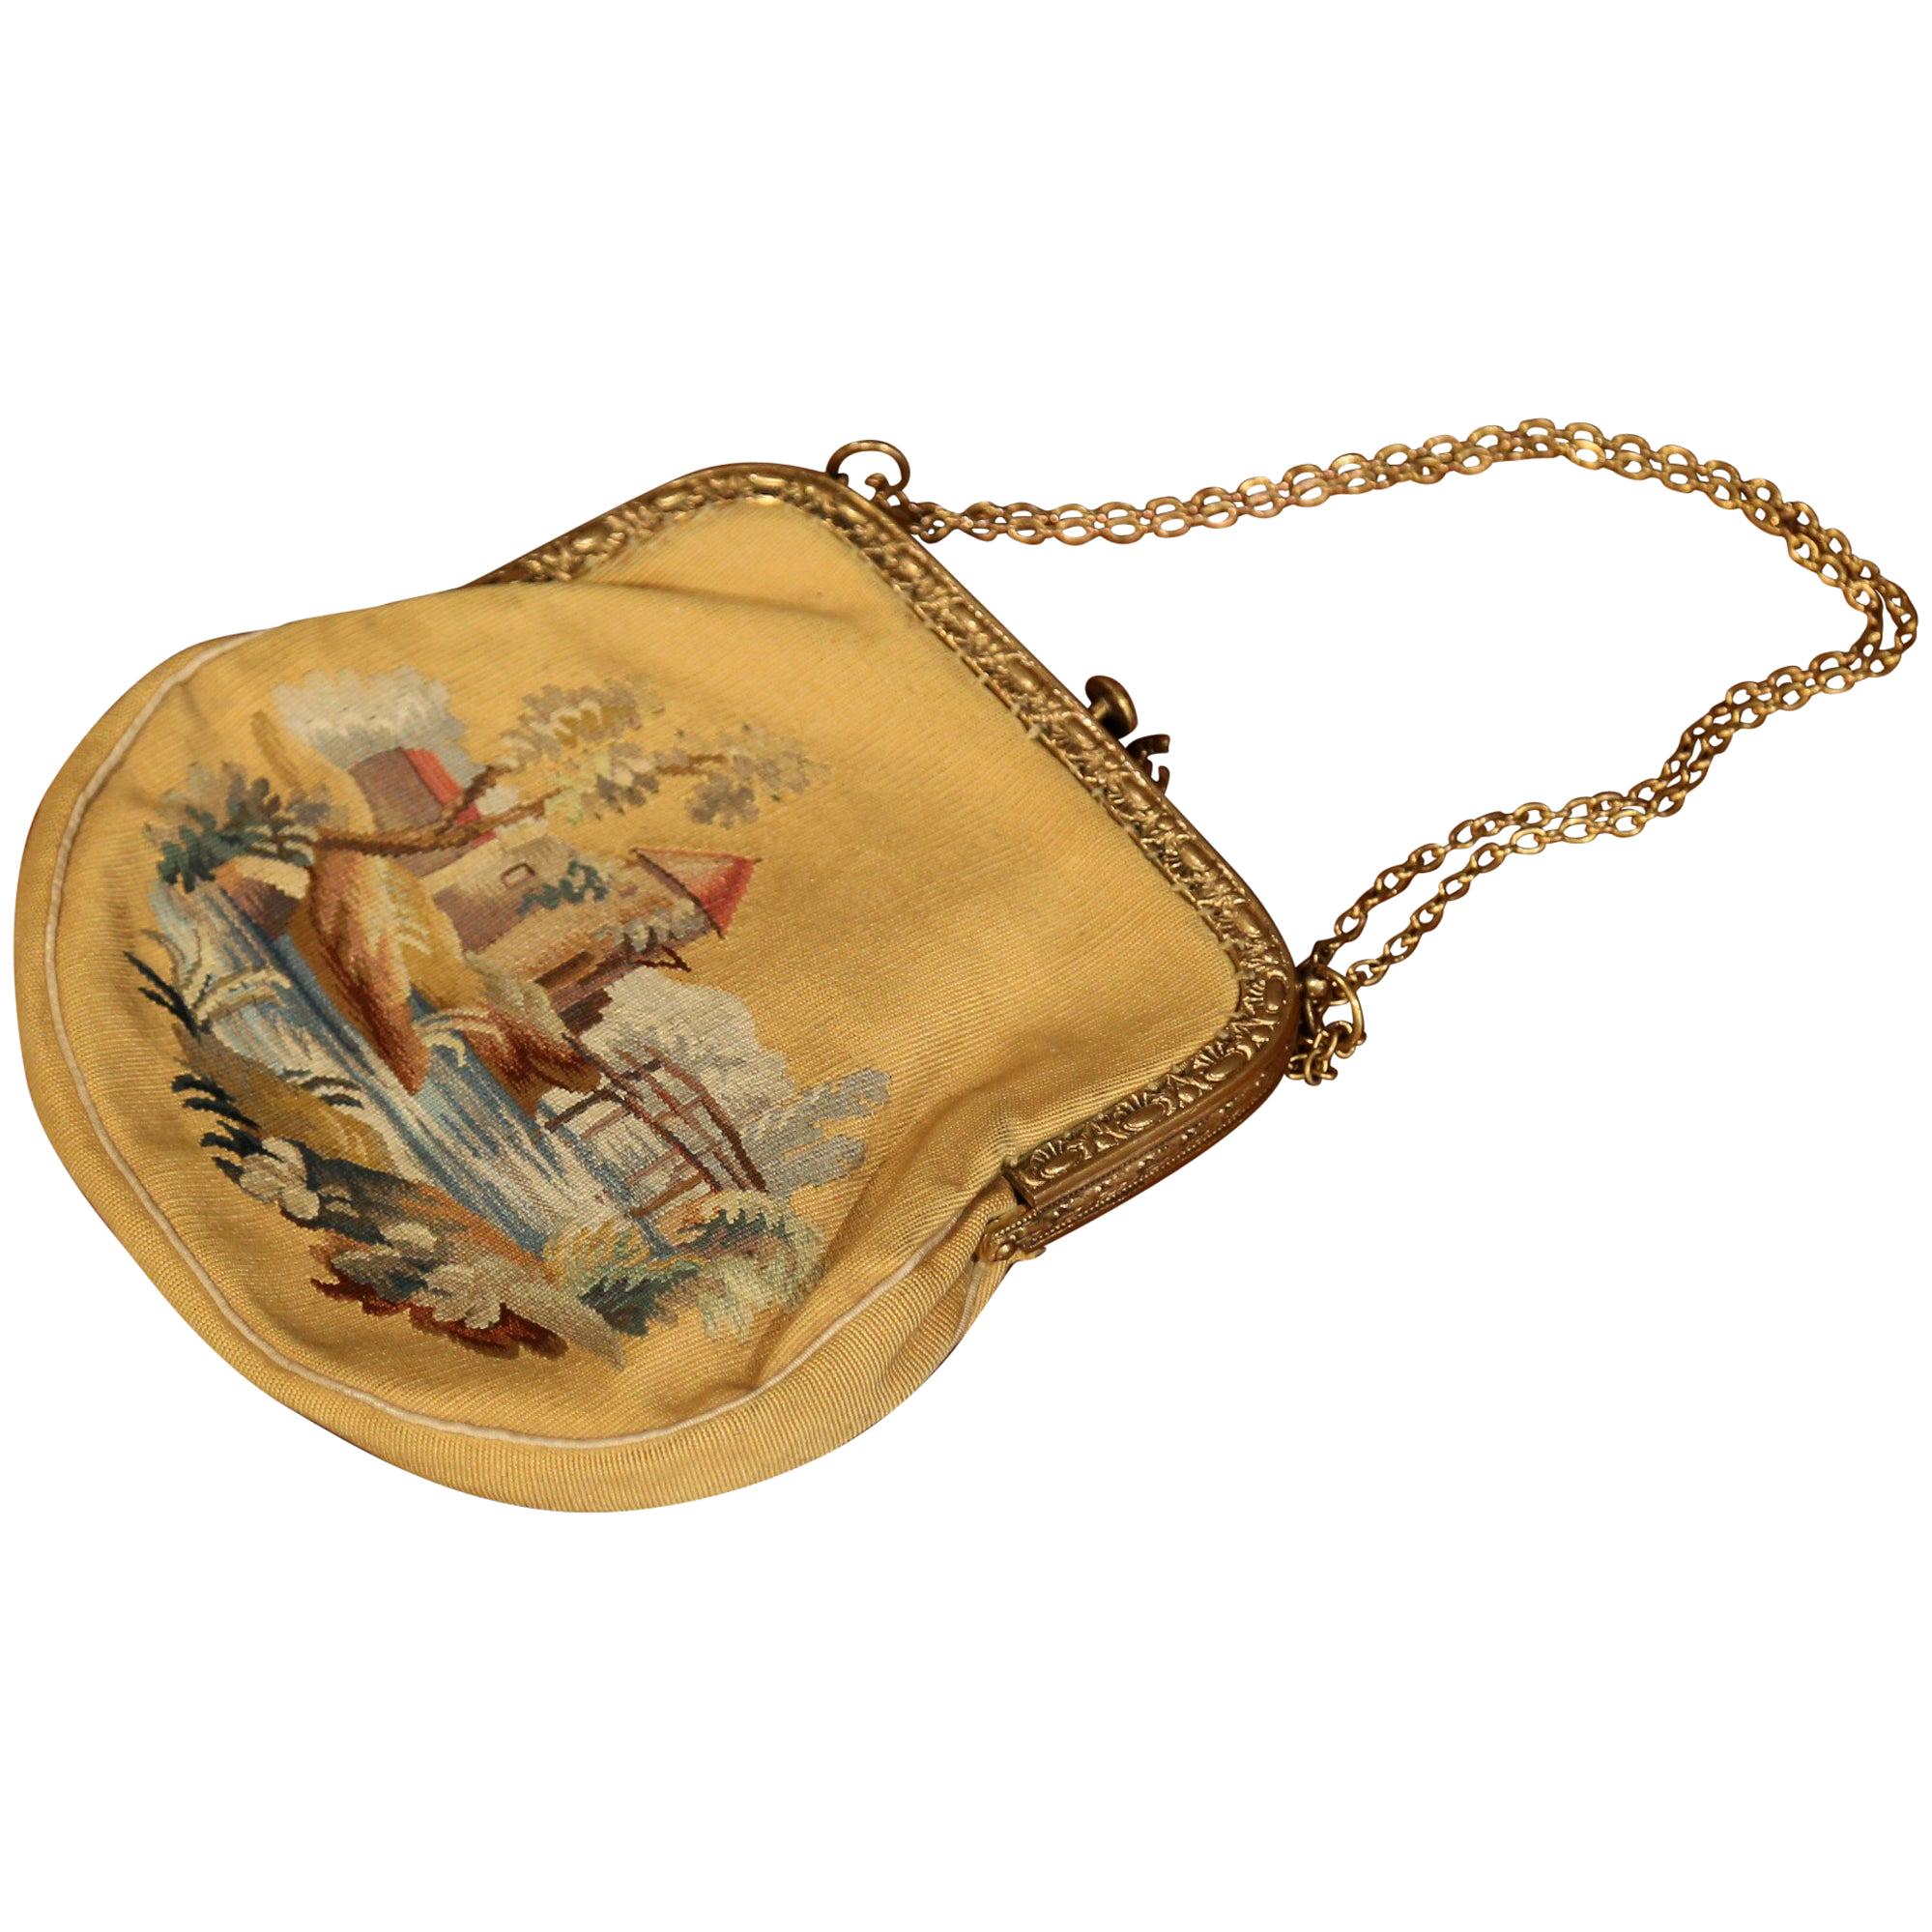 19th Century French Louis XVI Aubusson Ladies Purse with Brass Strap and Lock